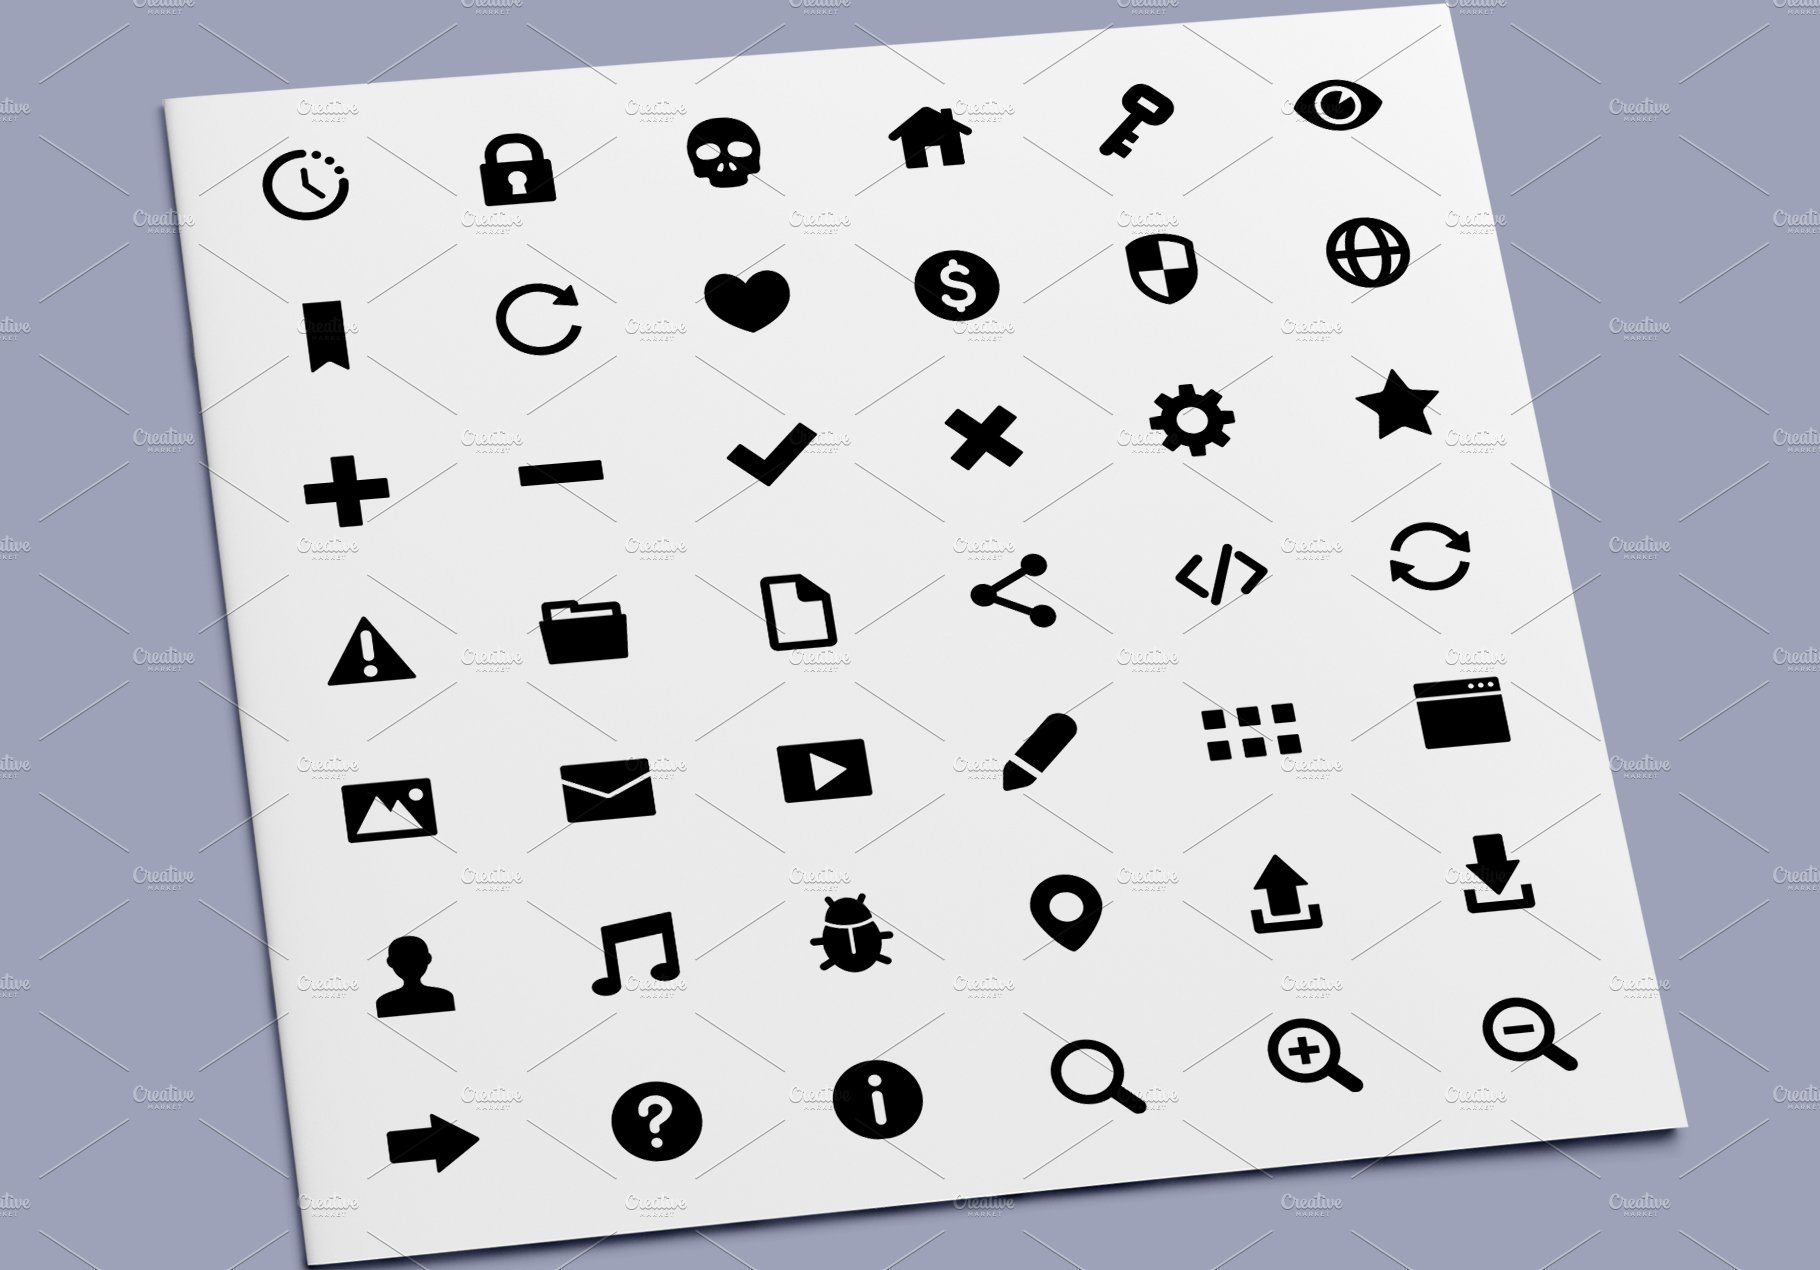 Web User Interface Icons cover image.